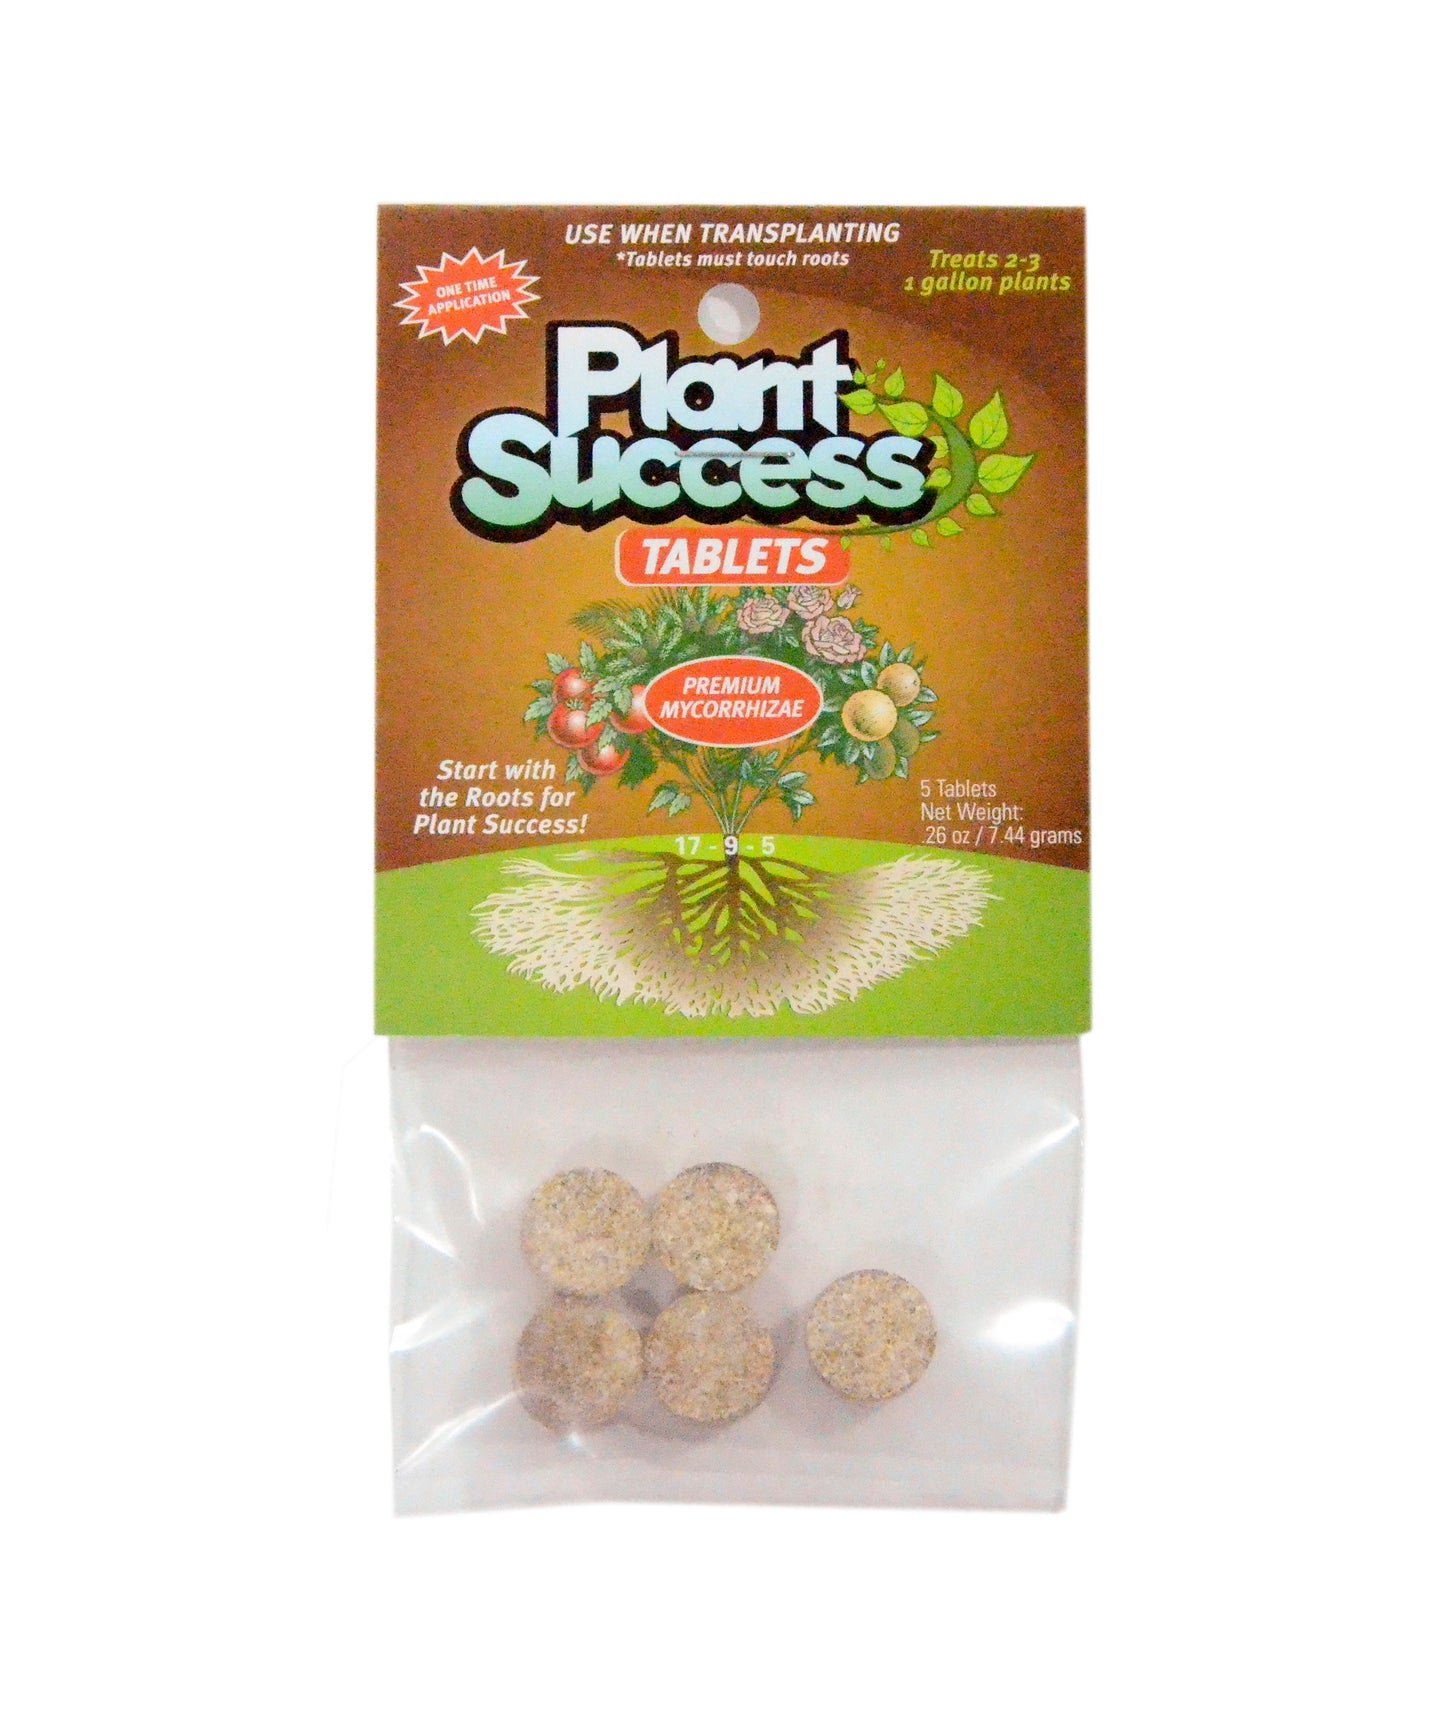 Plant Success tablets to help reduce transplant shock